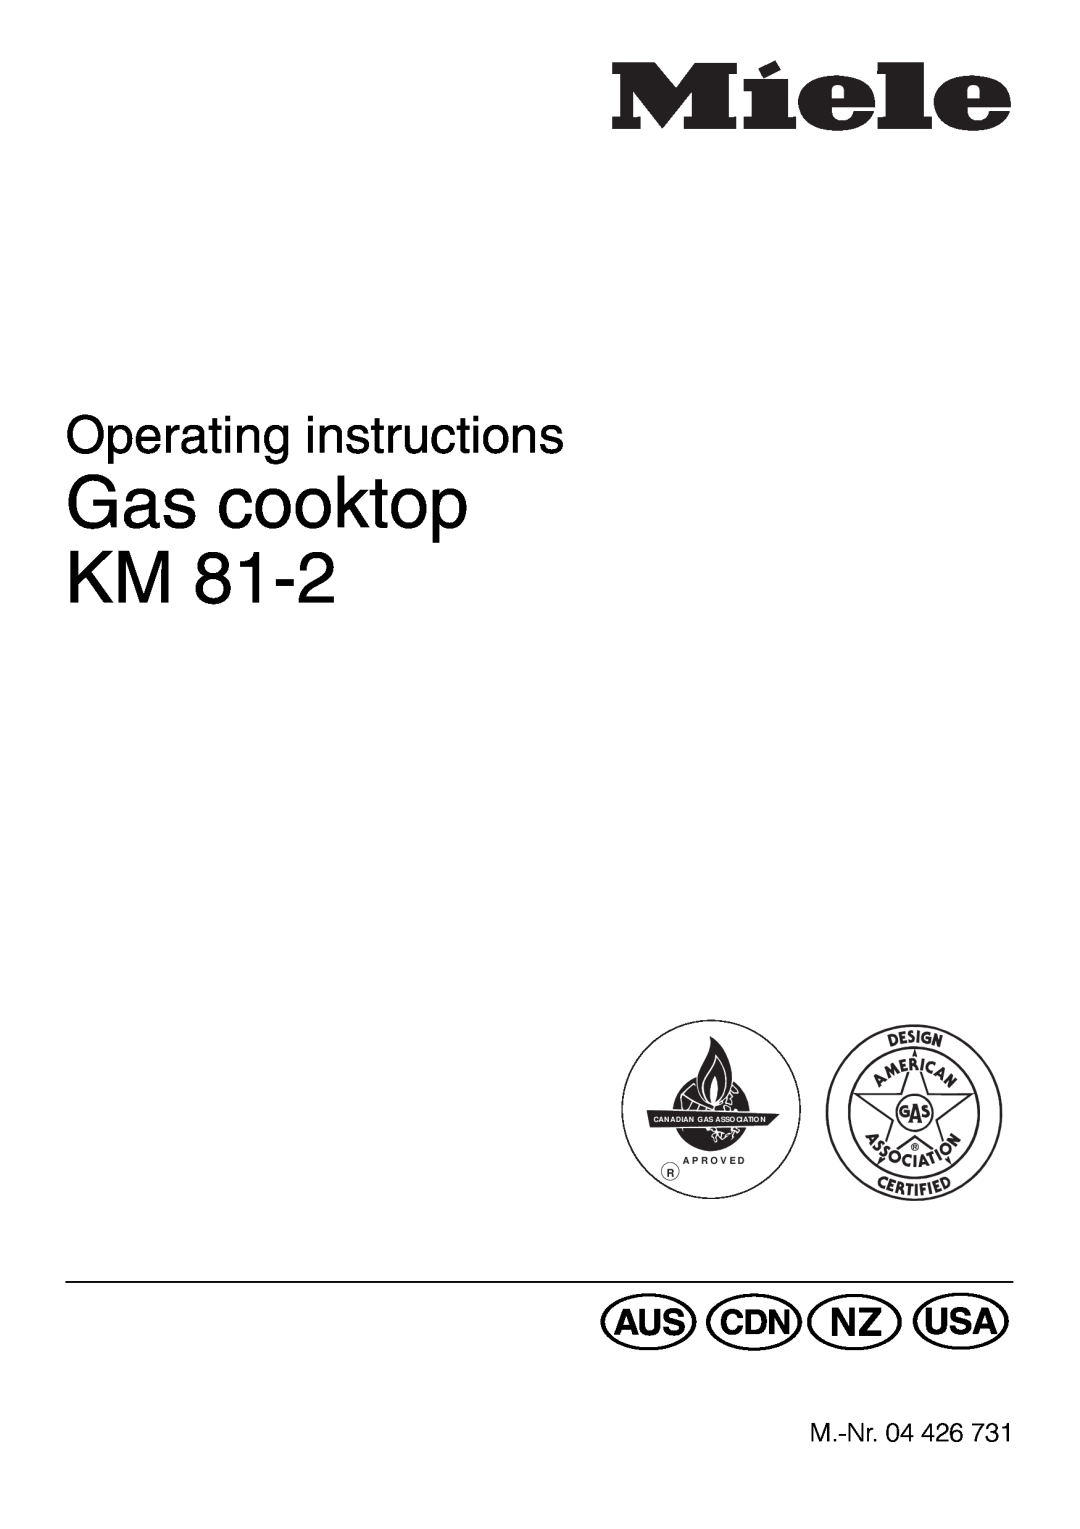 Miele KM 81-2 operating instructions Gas cooktop KM, Operating instructions, A P R O V E D R, Canadian Gas Association 